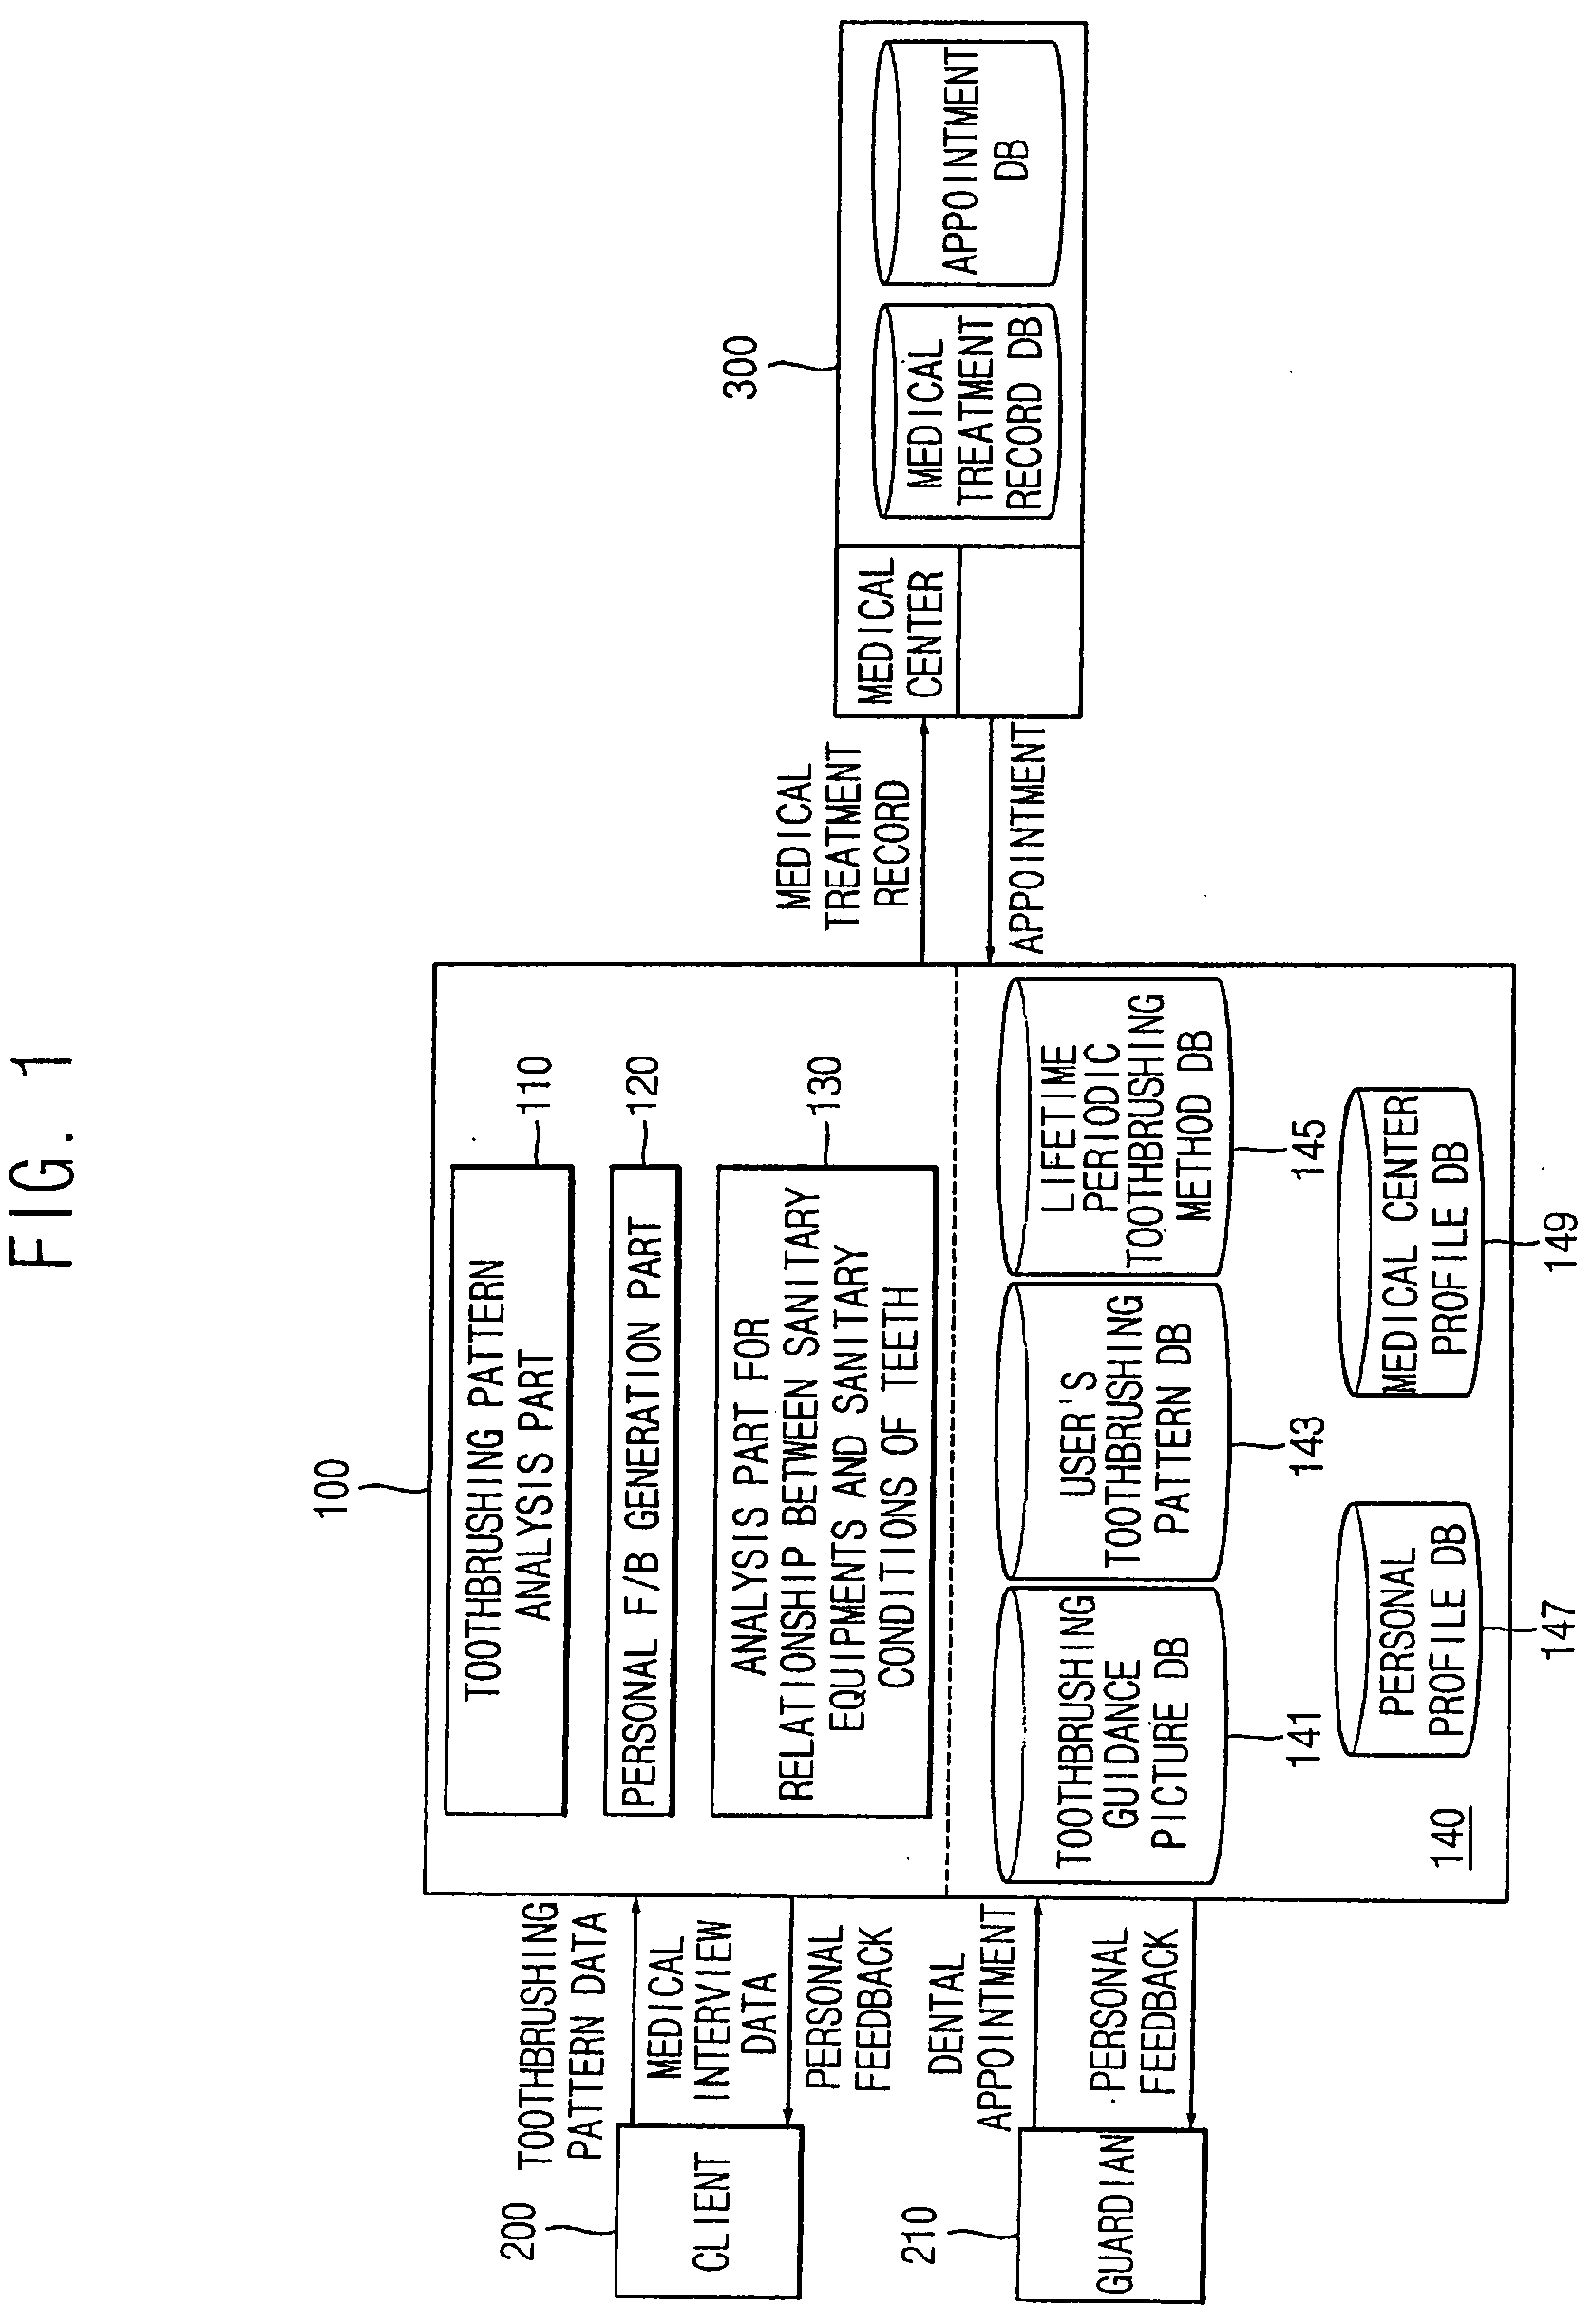 Method and system for managing of oral care